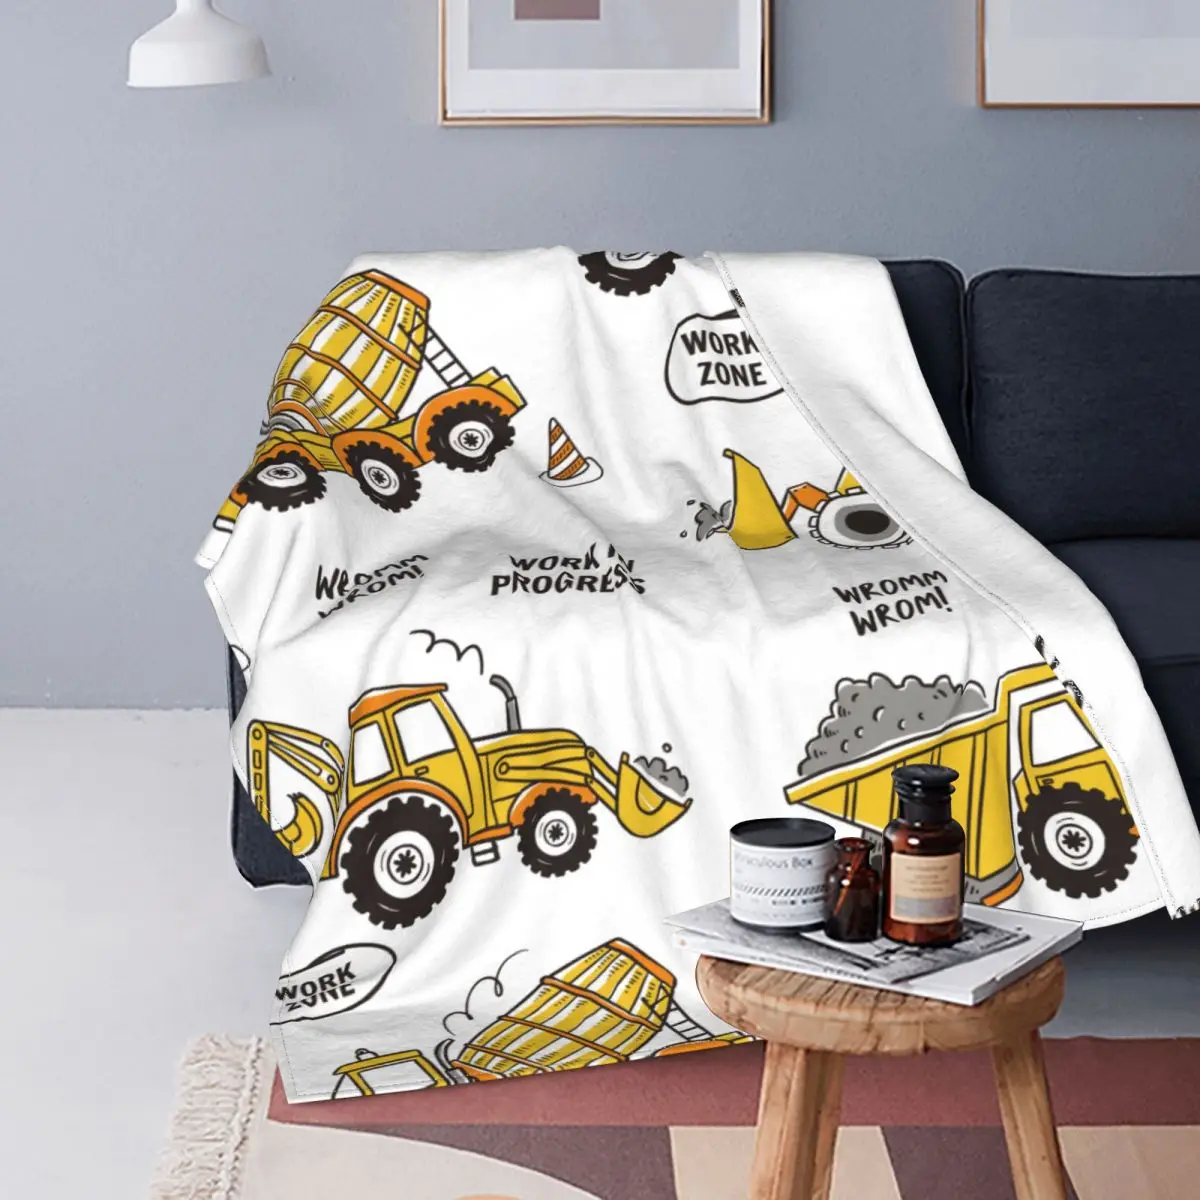 

Cartoon Truck Excavator Blankets Fleece Decoration Child Car Anime Plaid Breathable Warm Throw Blankets for Bed Couch Bedspread